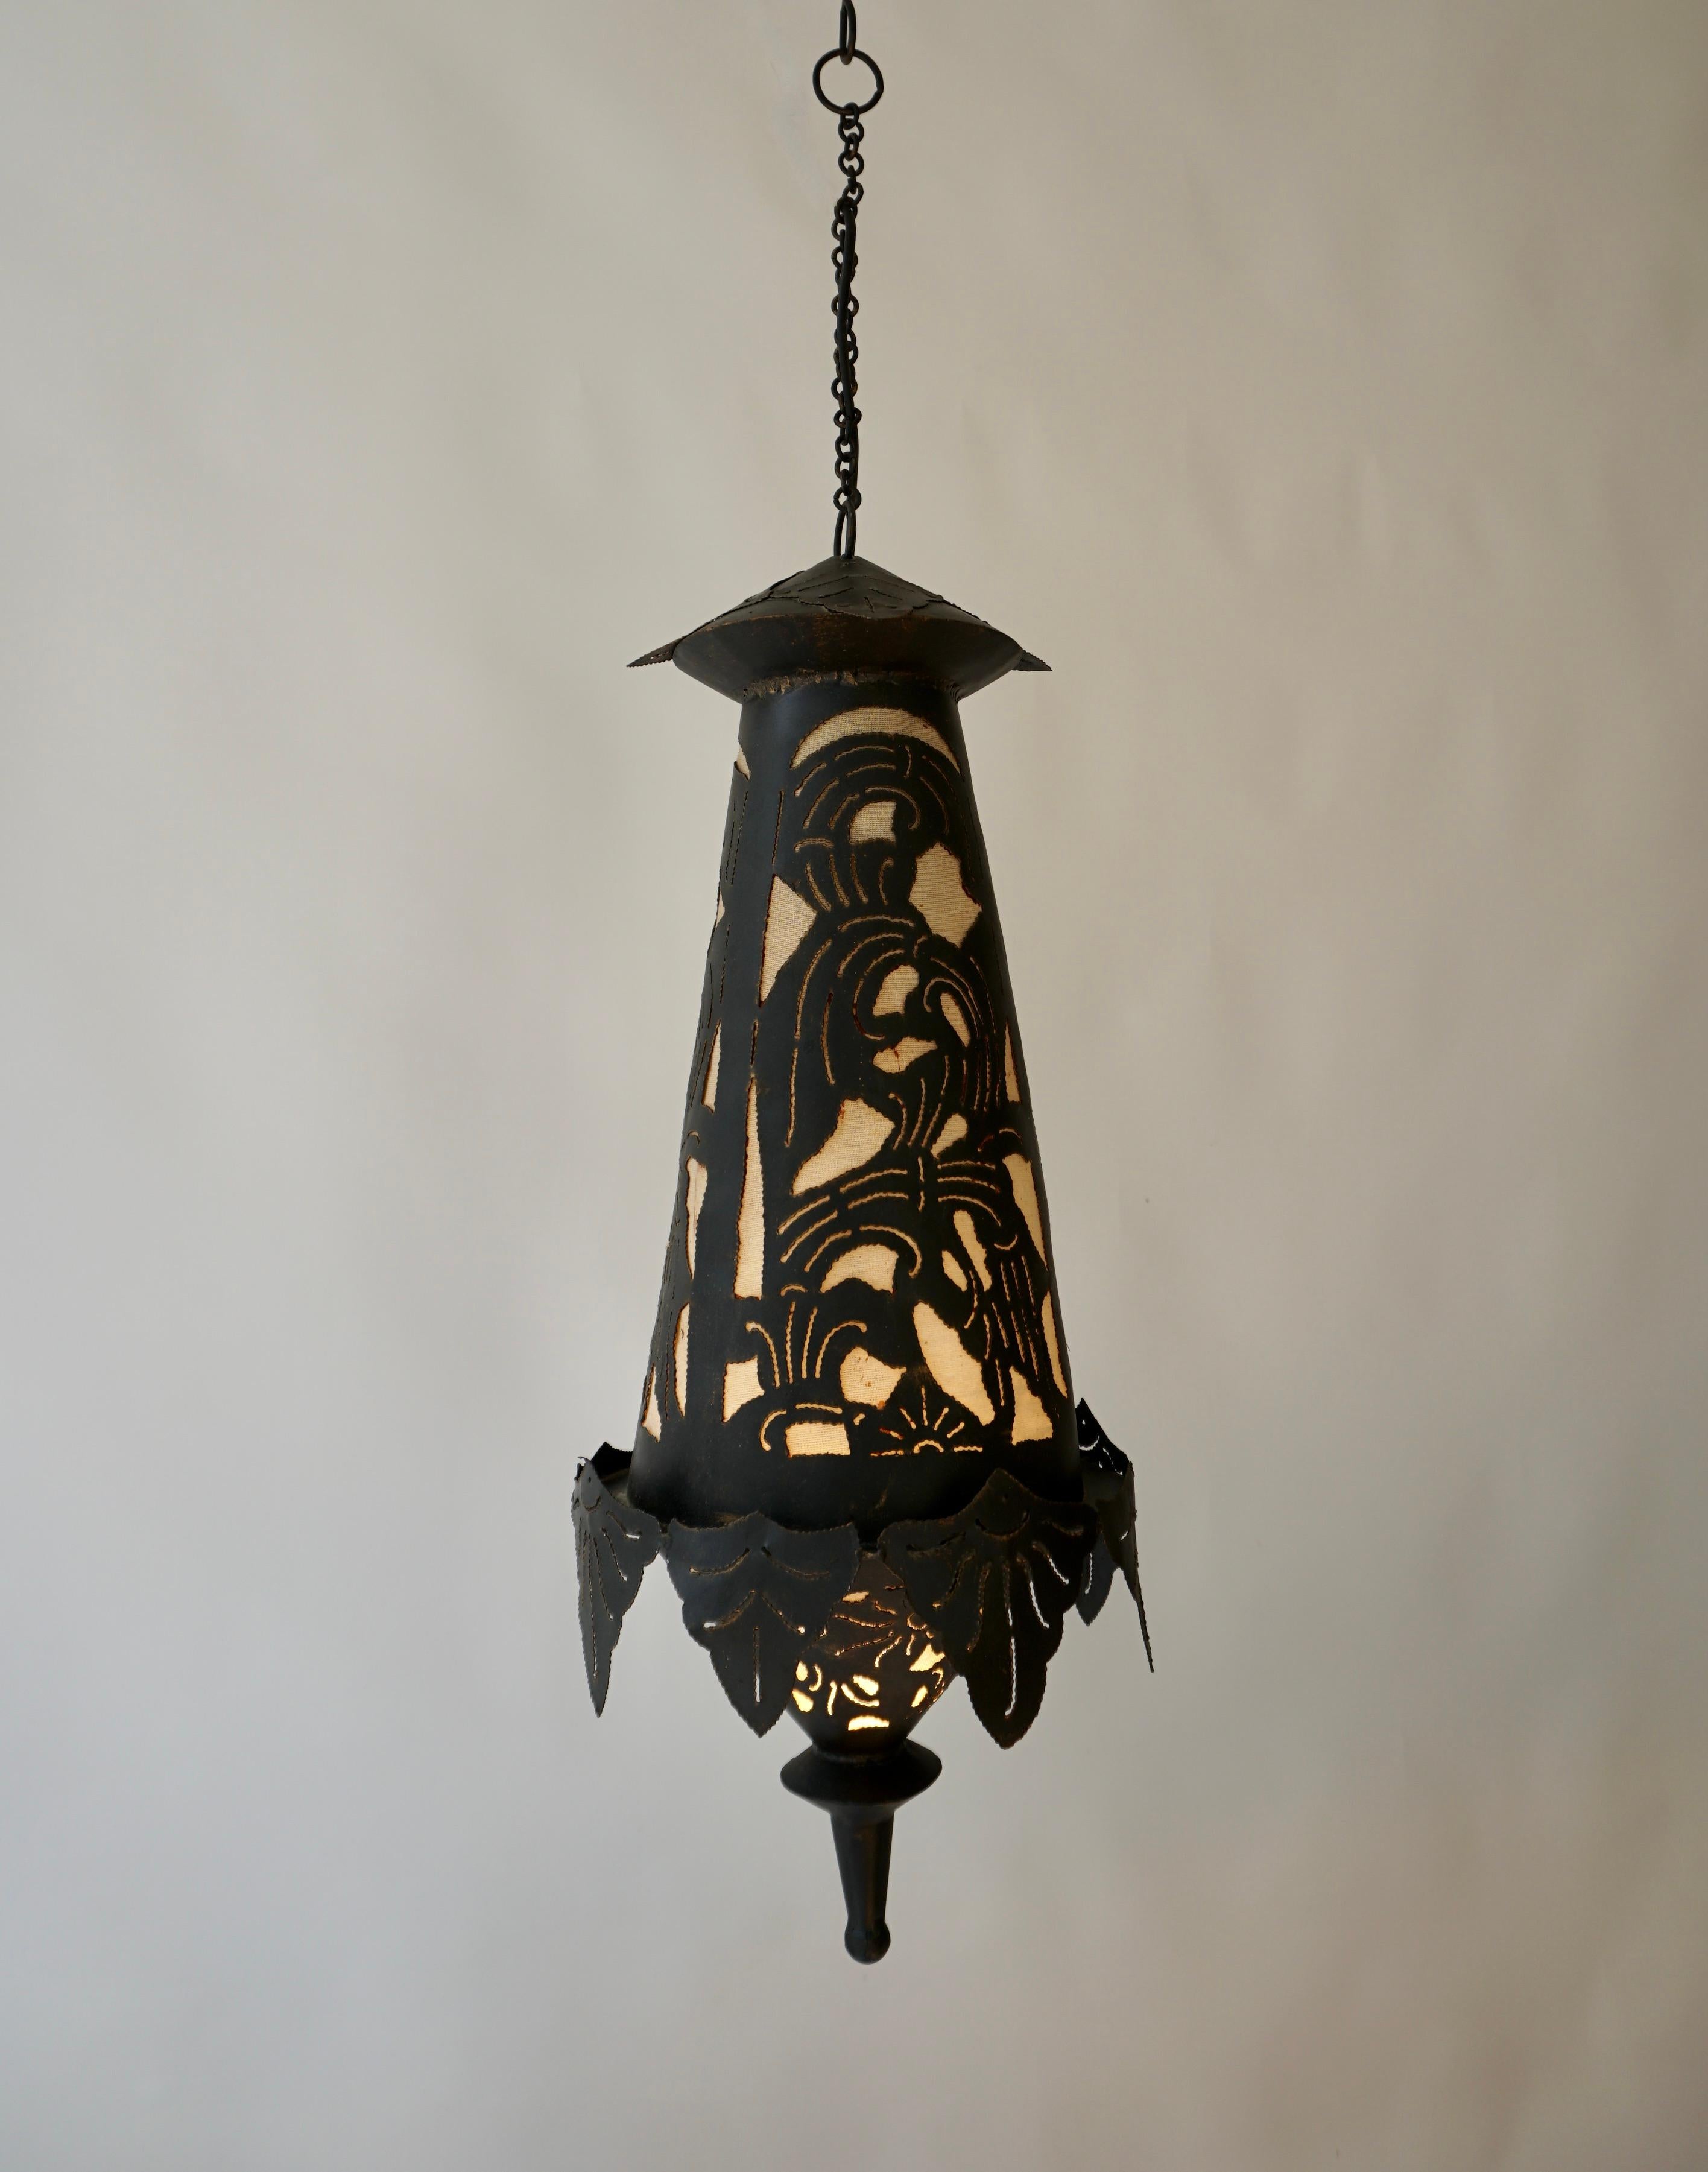 Beautiful Tibetan copper hanging lamp or lantern in a conical shape, covered with textile on the inside to provide a warm light.

Diameter 10.2